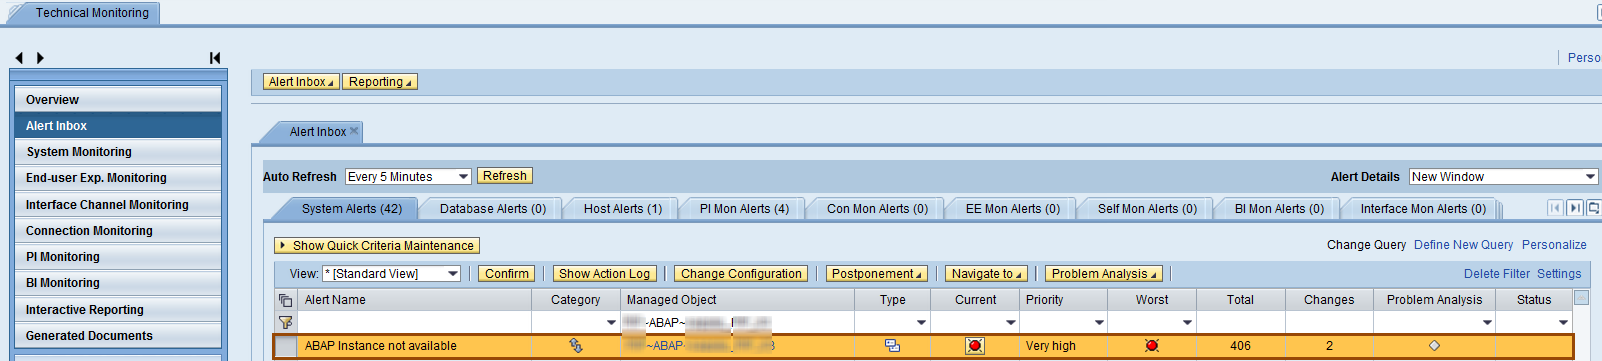 abap instance availability.png